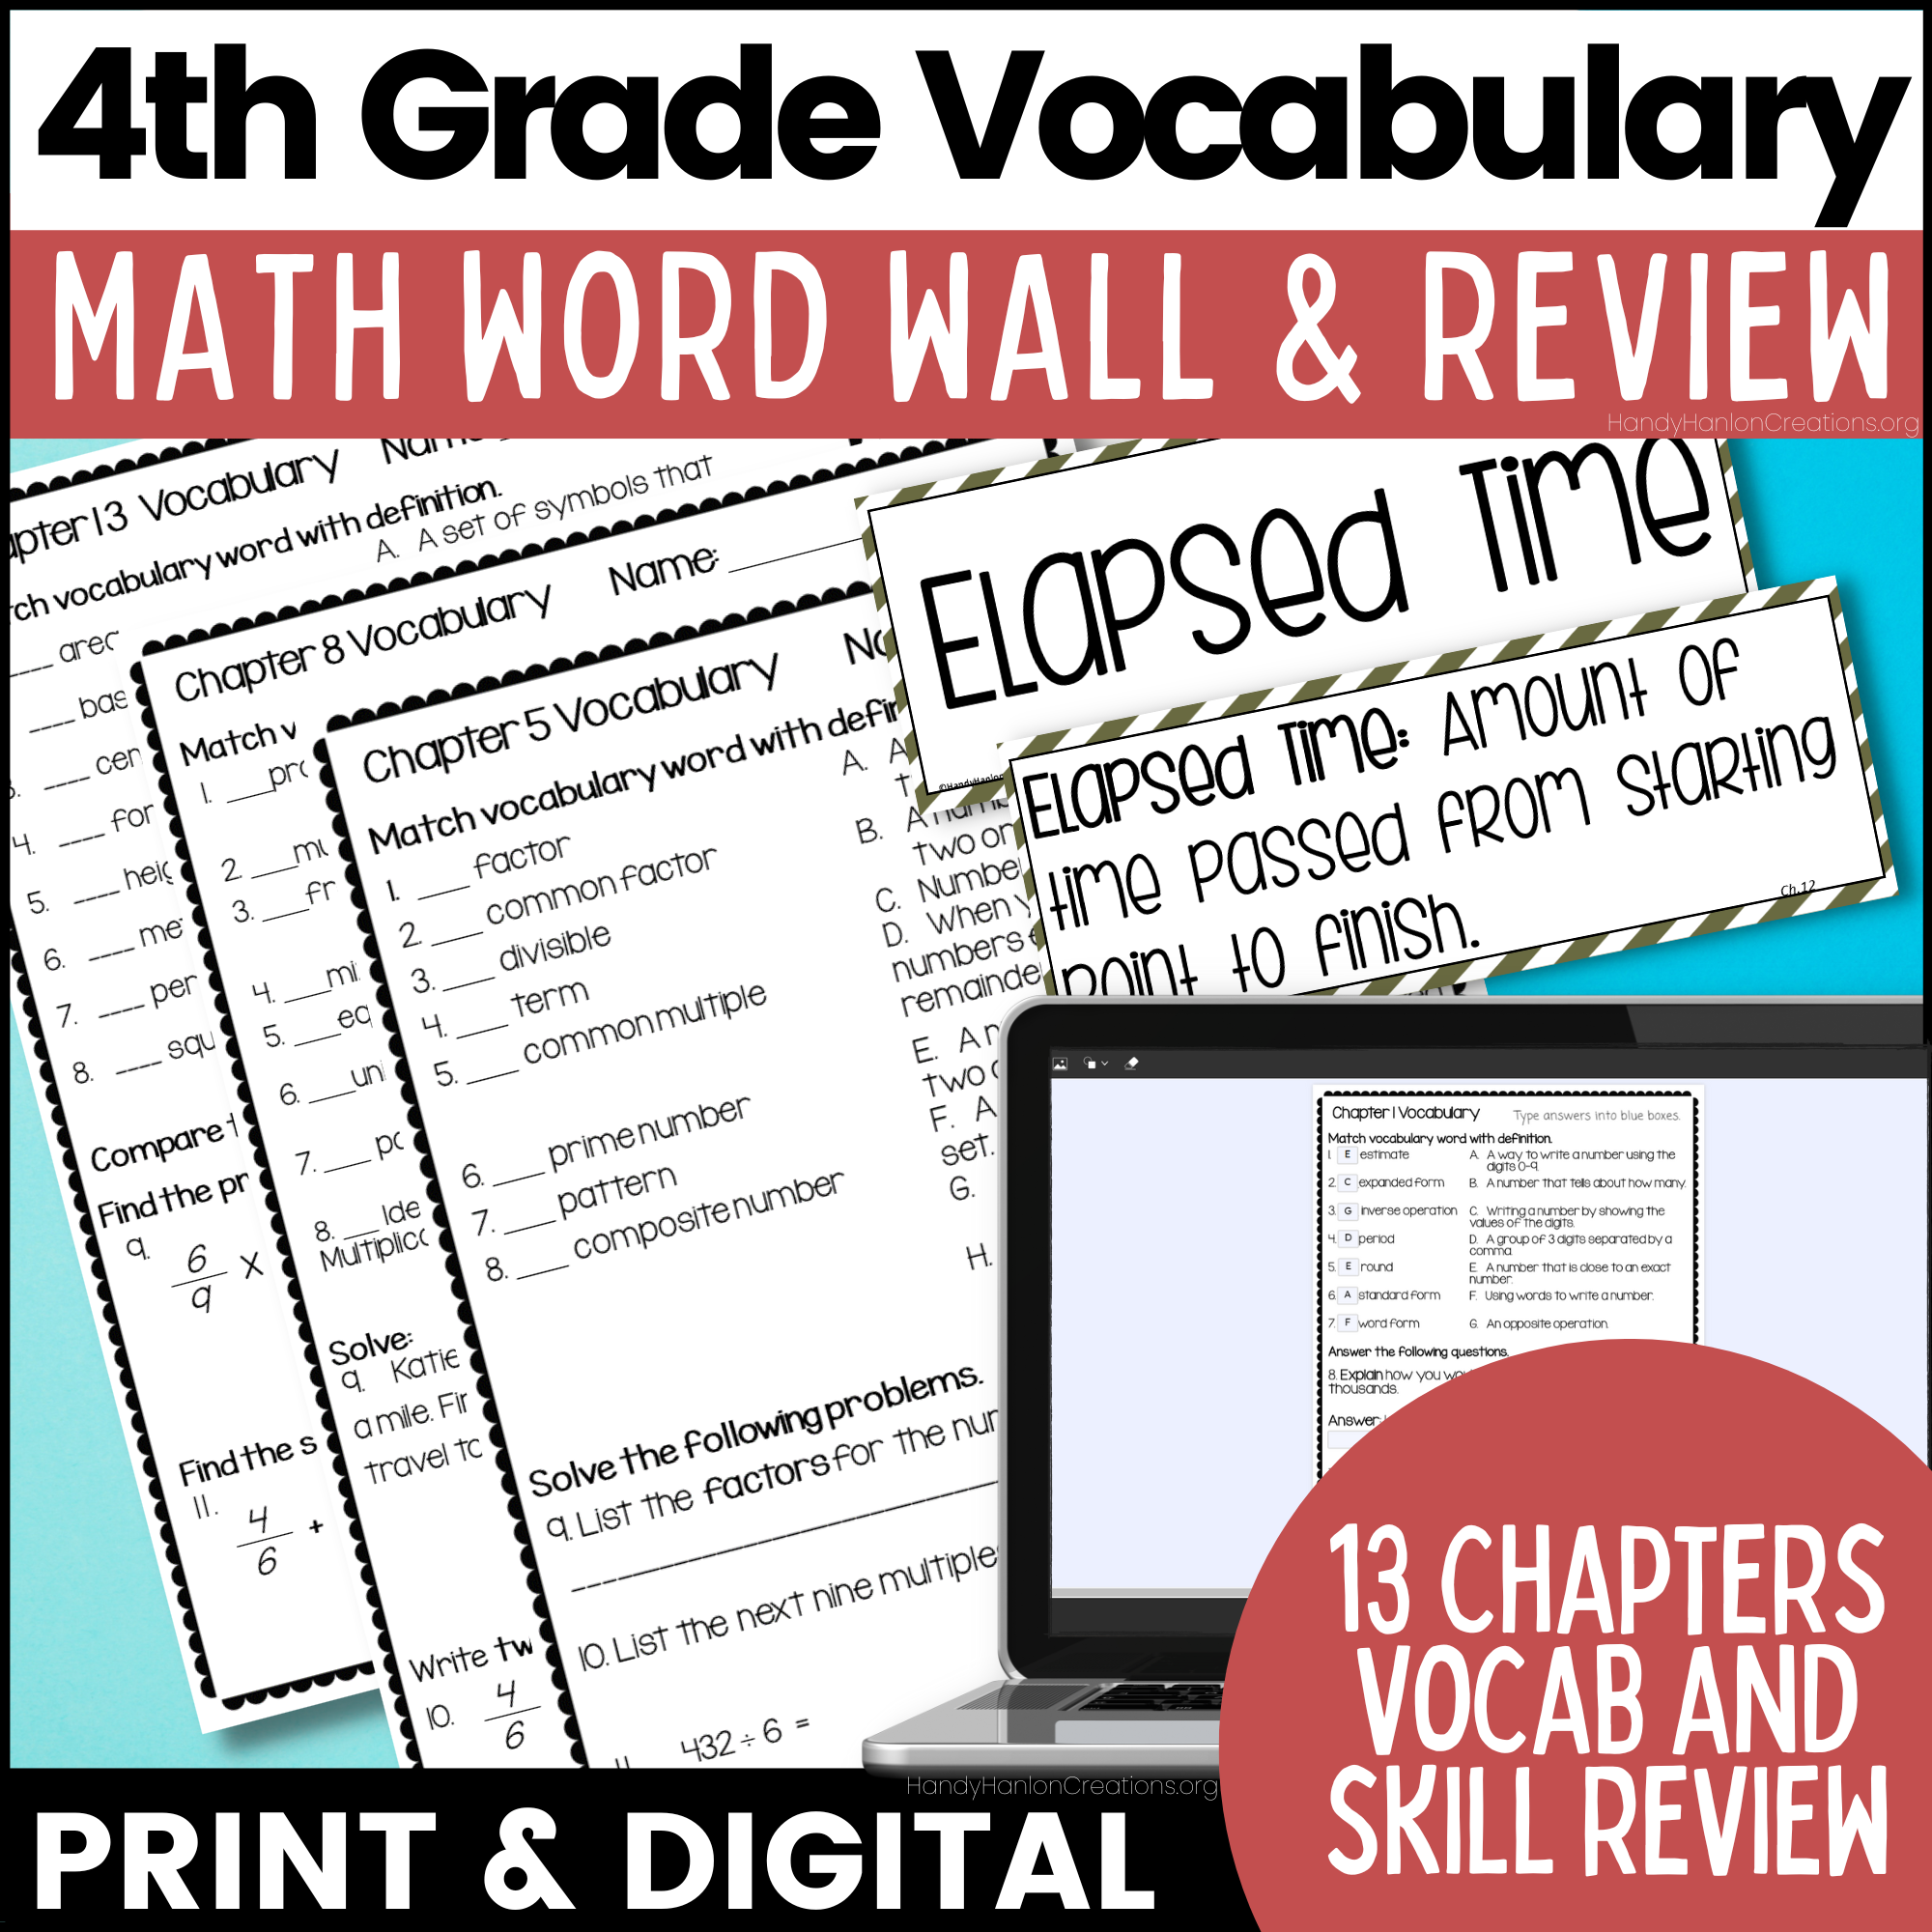 Help your students learn upper elementary math vocabulary by posting visual aids on a math focus wall. Cards have math vocabulary words with definition and some examples. Math Vocabulary Worksheets helps review 4th grade math vocabulary with matching and skill application. This works well in math centers, small groups, or as an assessment of learning.